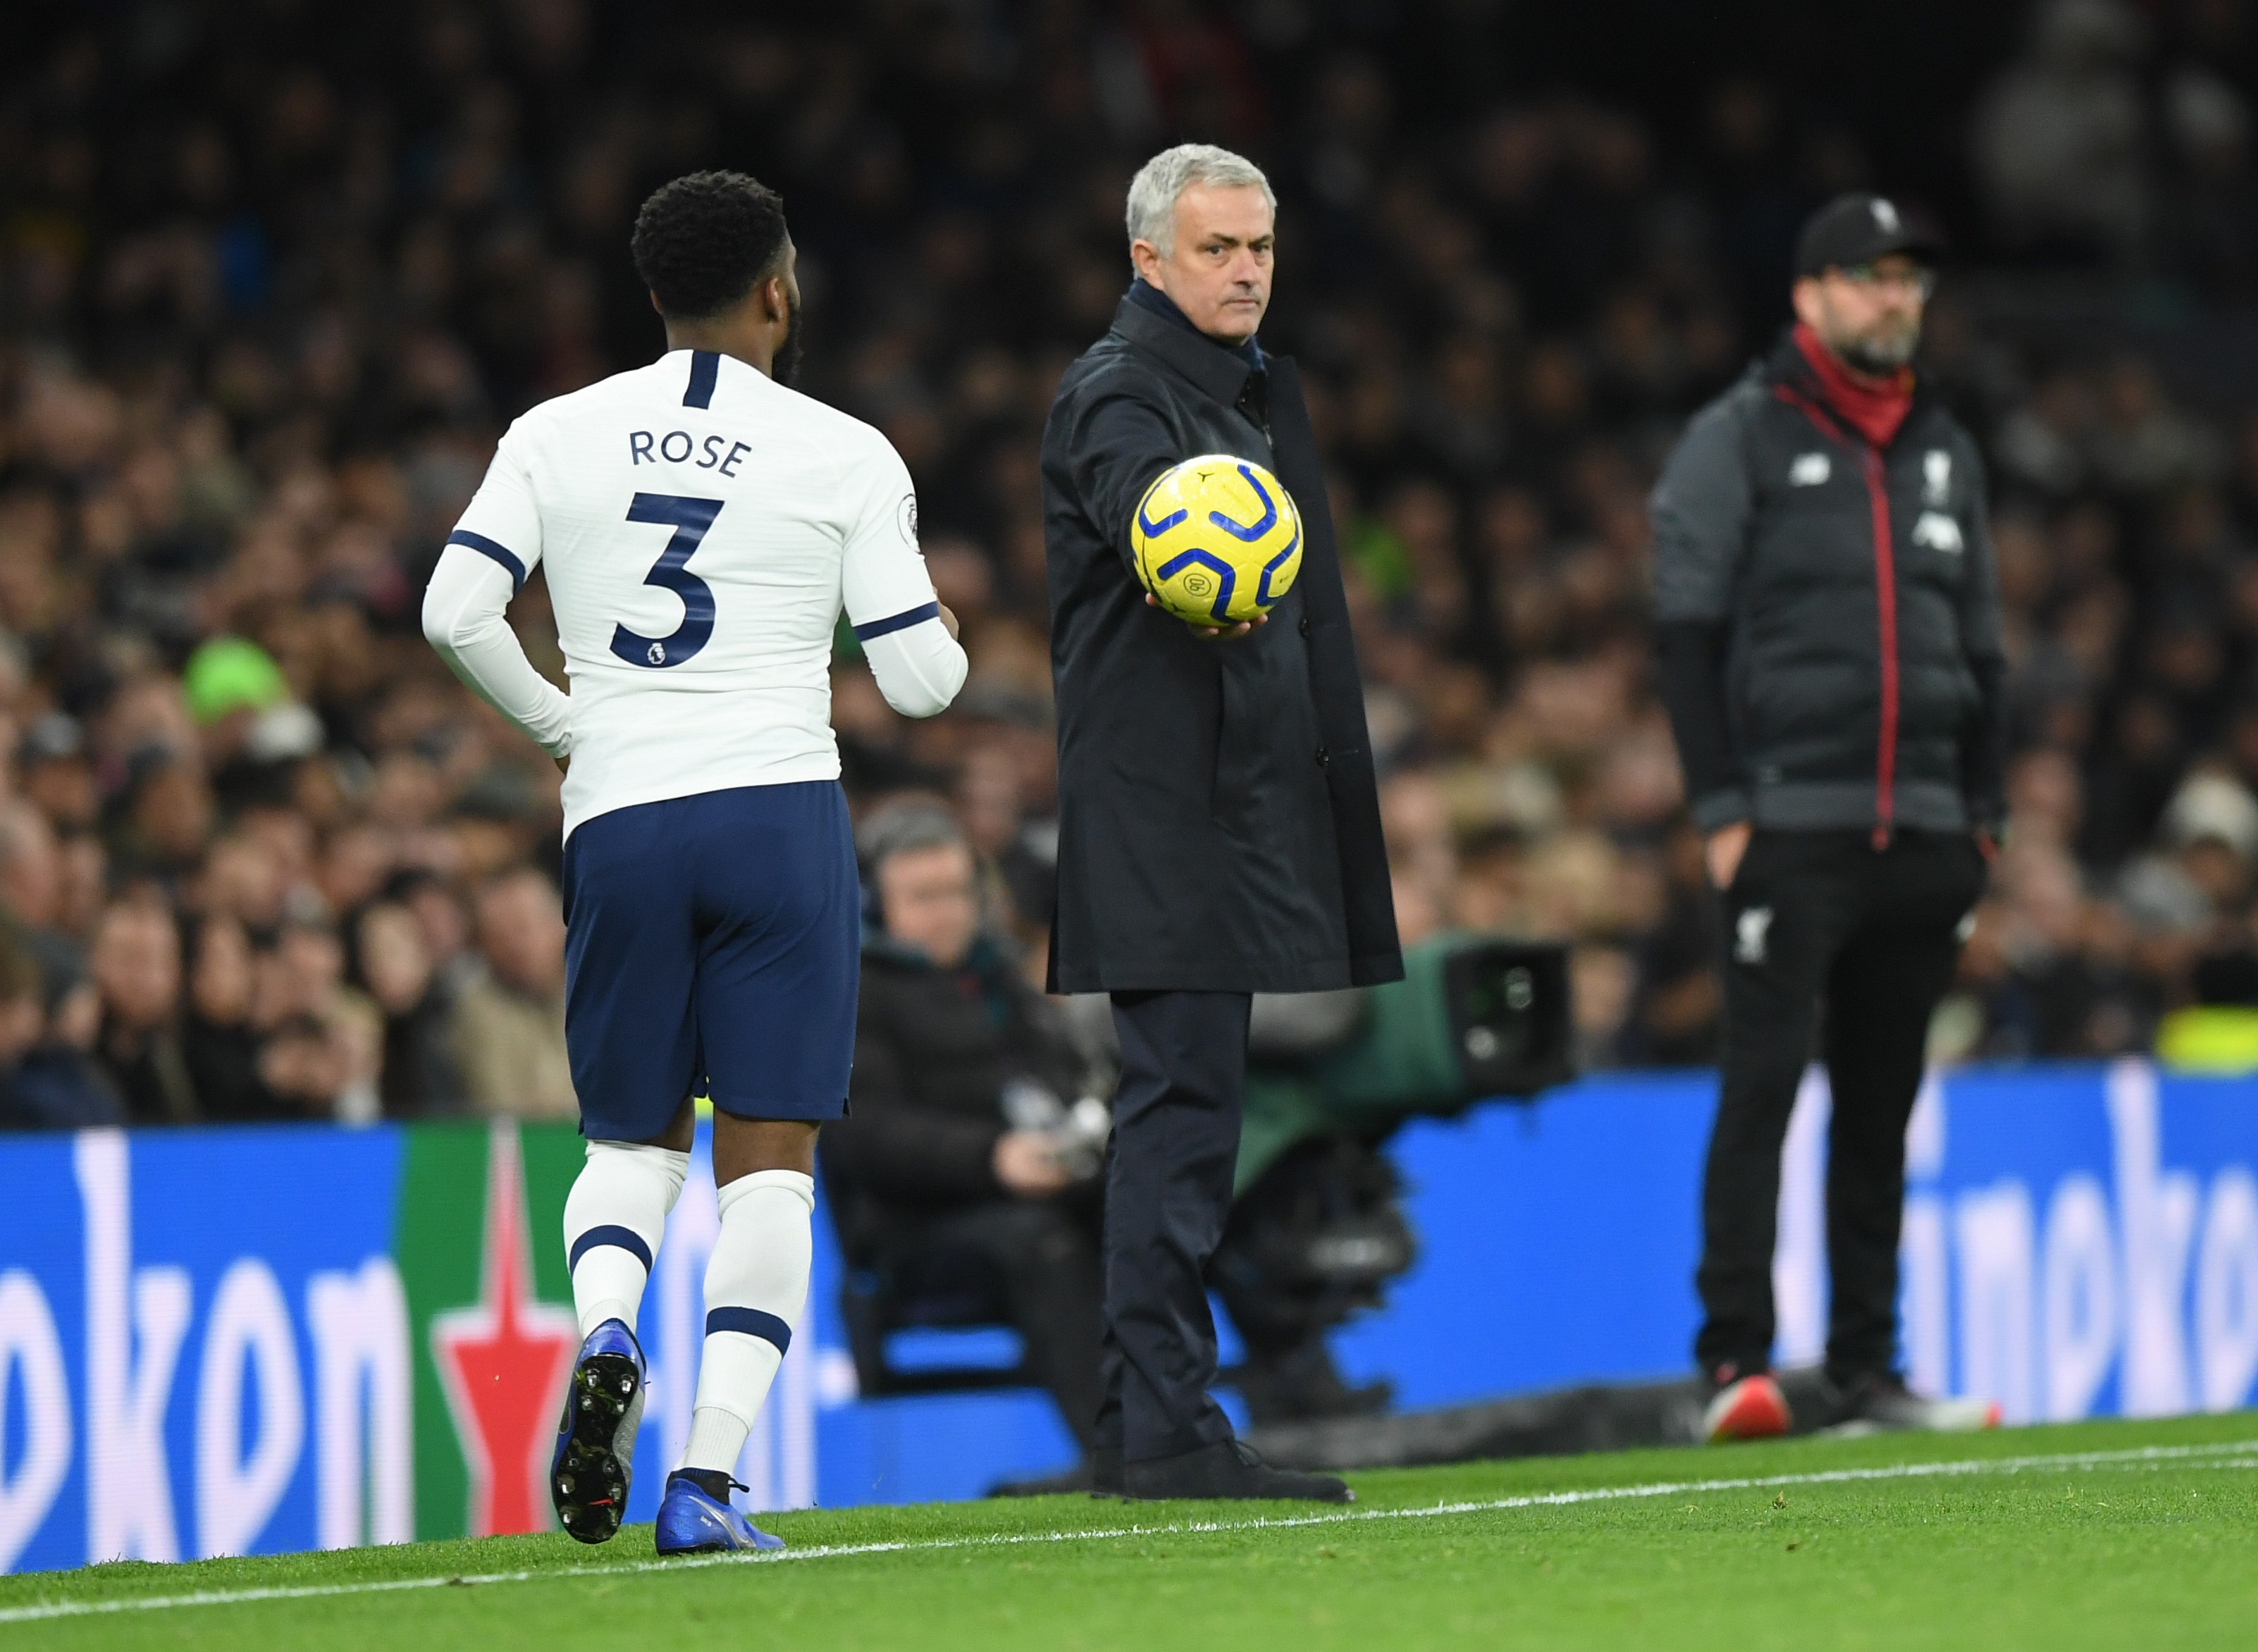 Danny Rose is likely to be sold by Mourinho in the summer (Photo by Shaun Botterill/Getty Images)